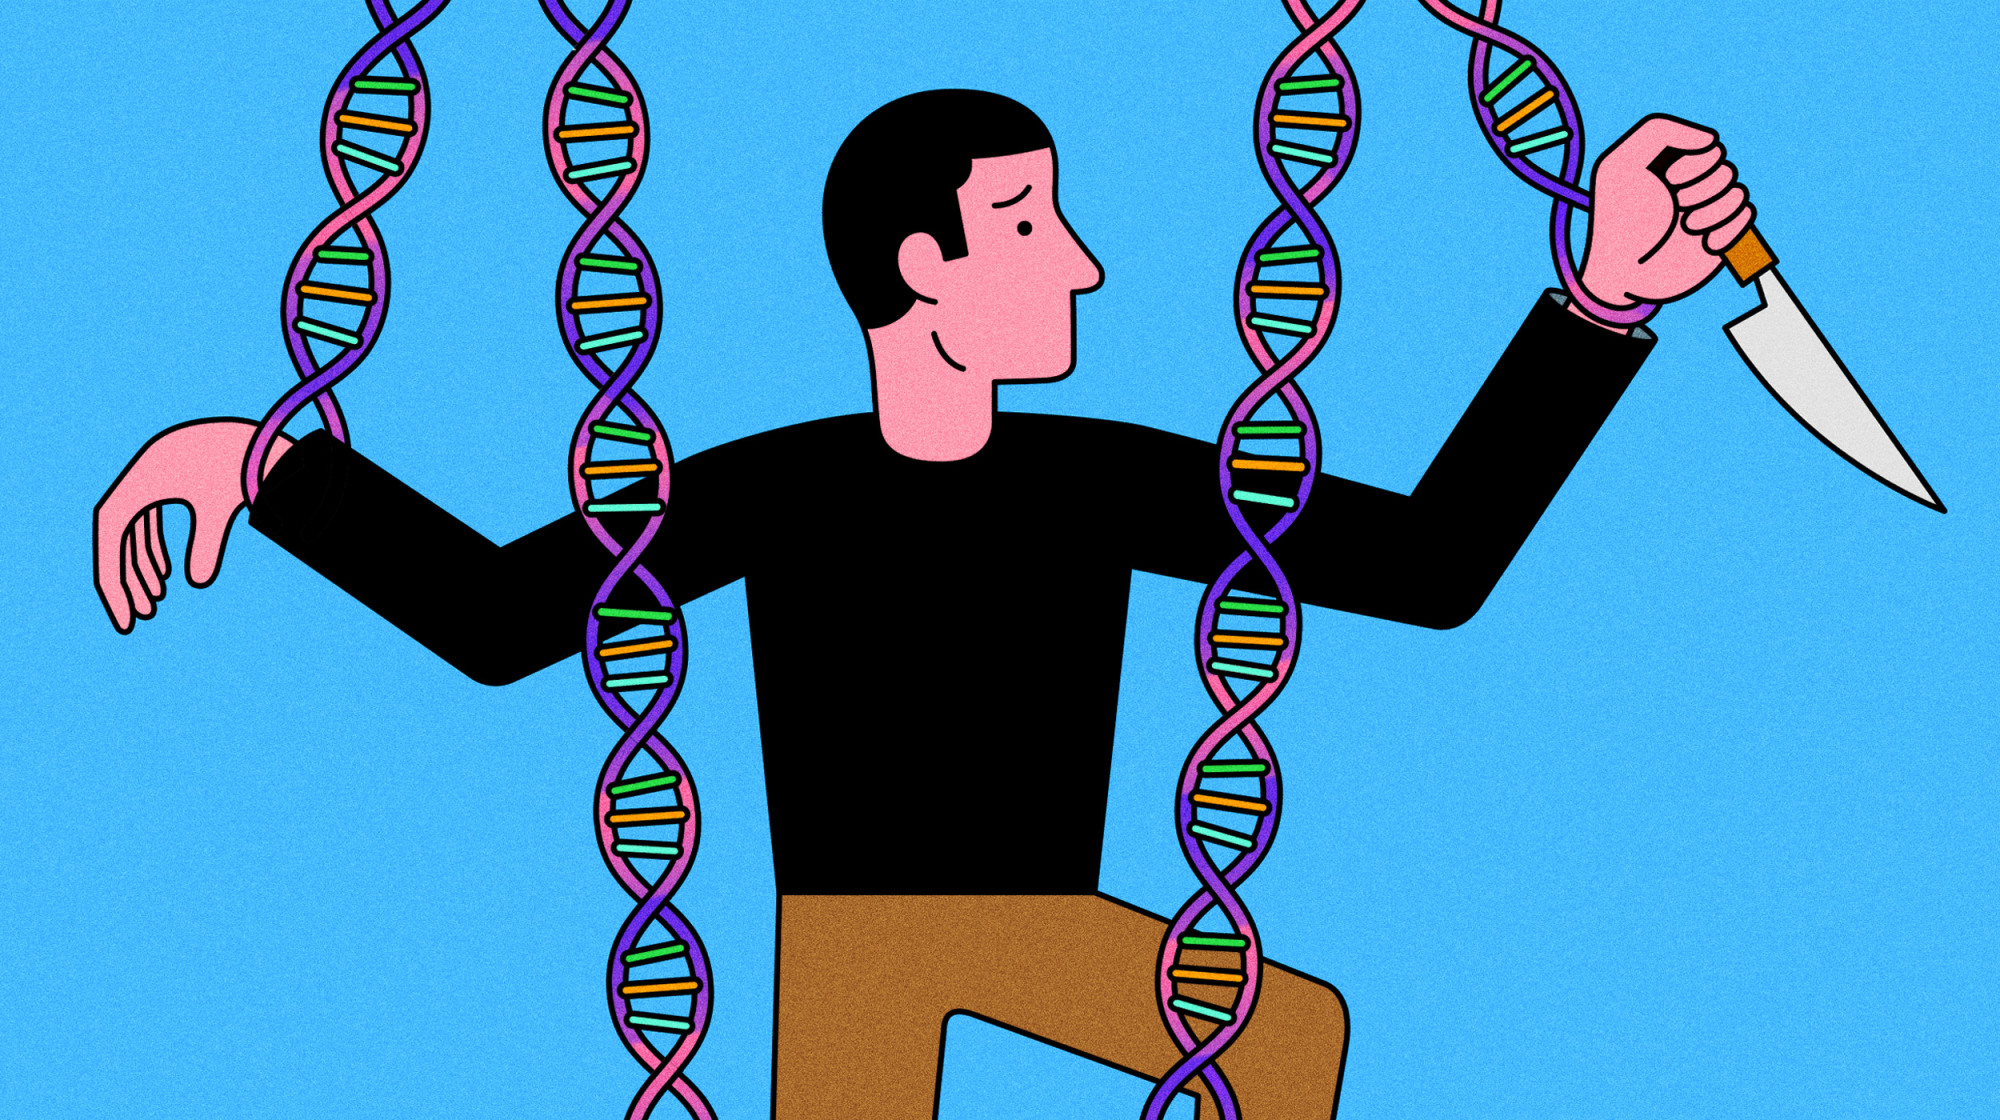 Illustration of man holding knife while being controlled by DNA puppet strings.